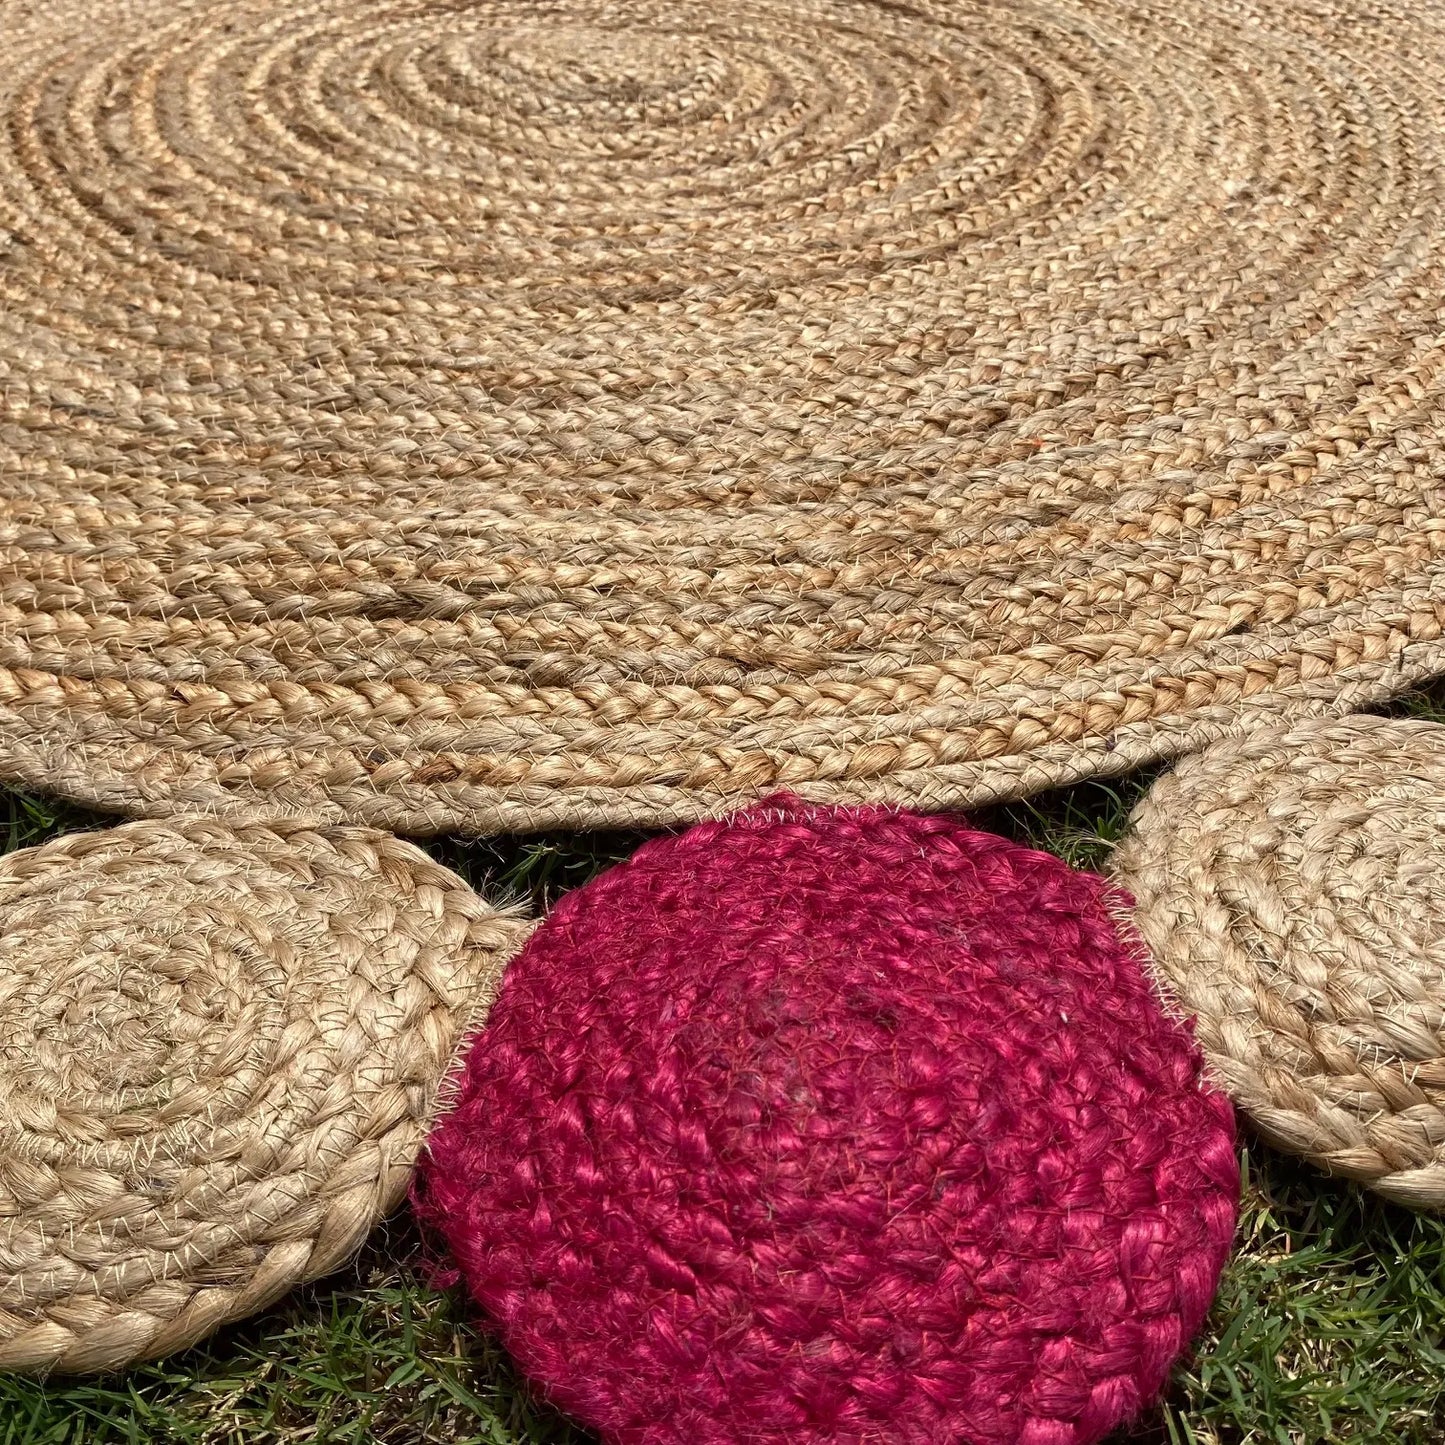 Avioni Home Eco Collection – Handwoven Braided Jute Round Carpet with Pink Circle Borders